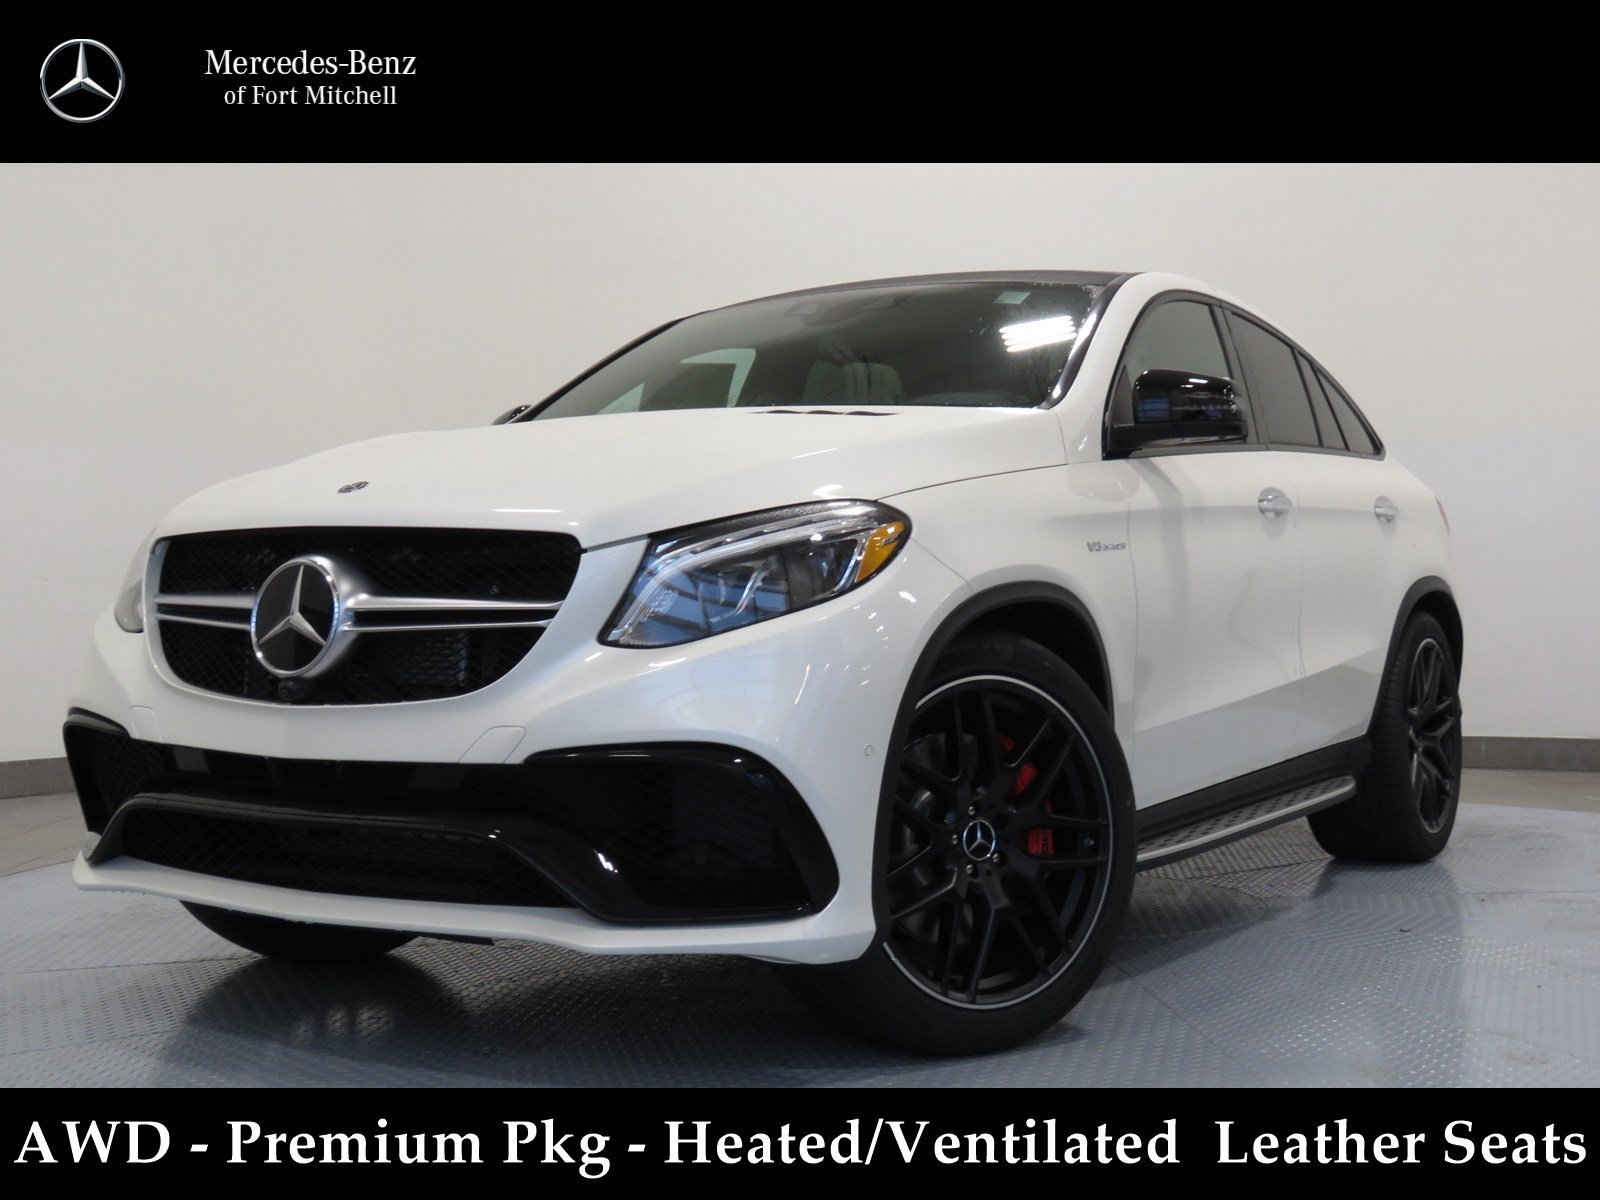 New 2019 Mercedes Benz Amg Gle 63 S Awd 4matic